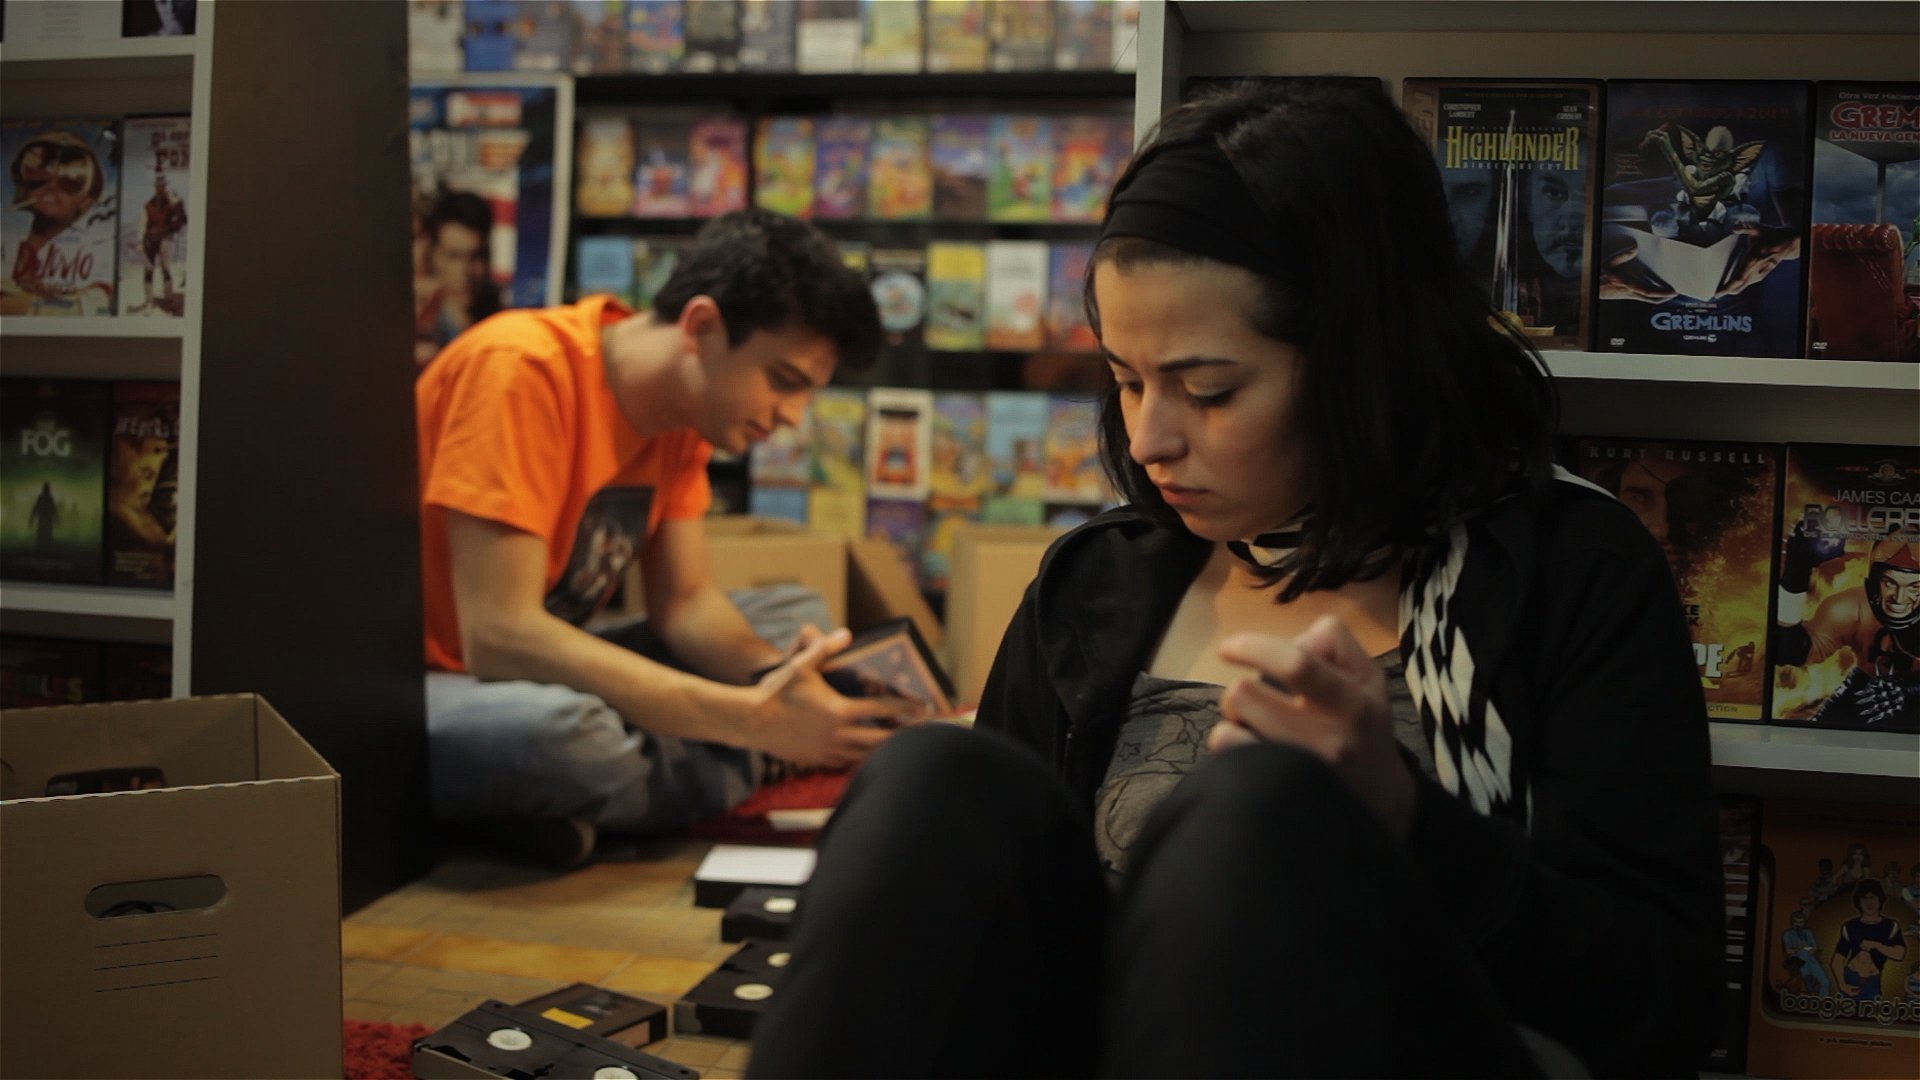 Margarida and Tiago in the Videostore